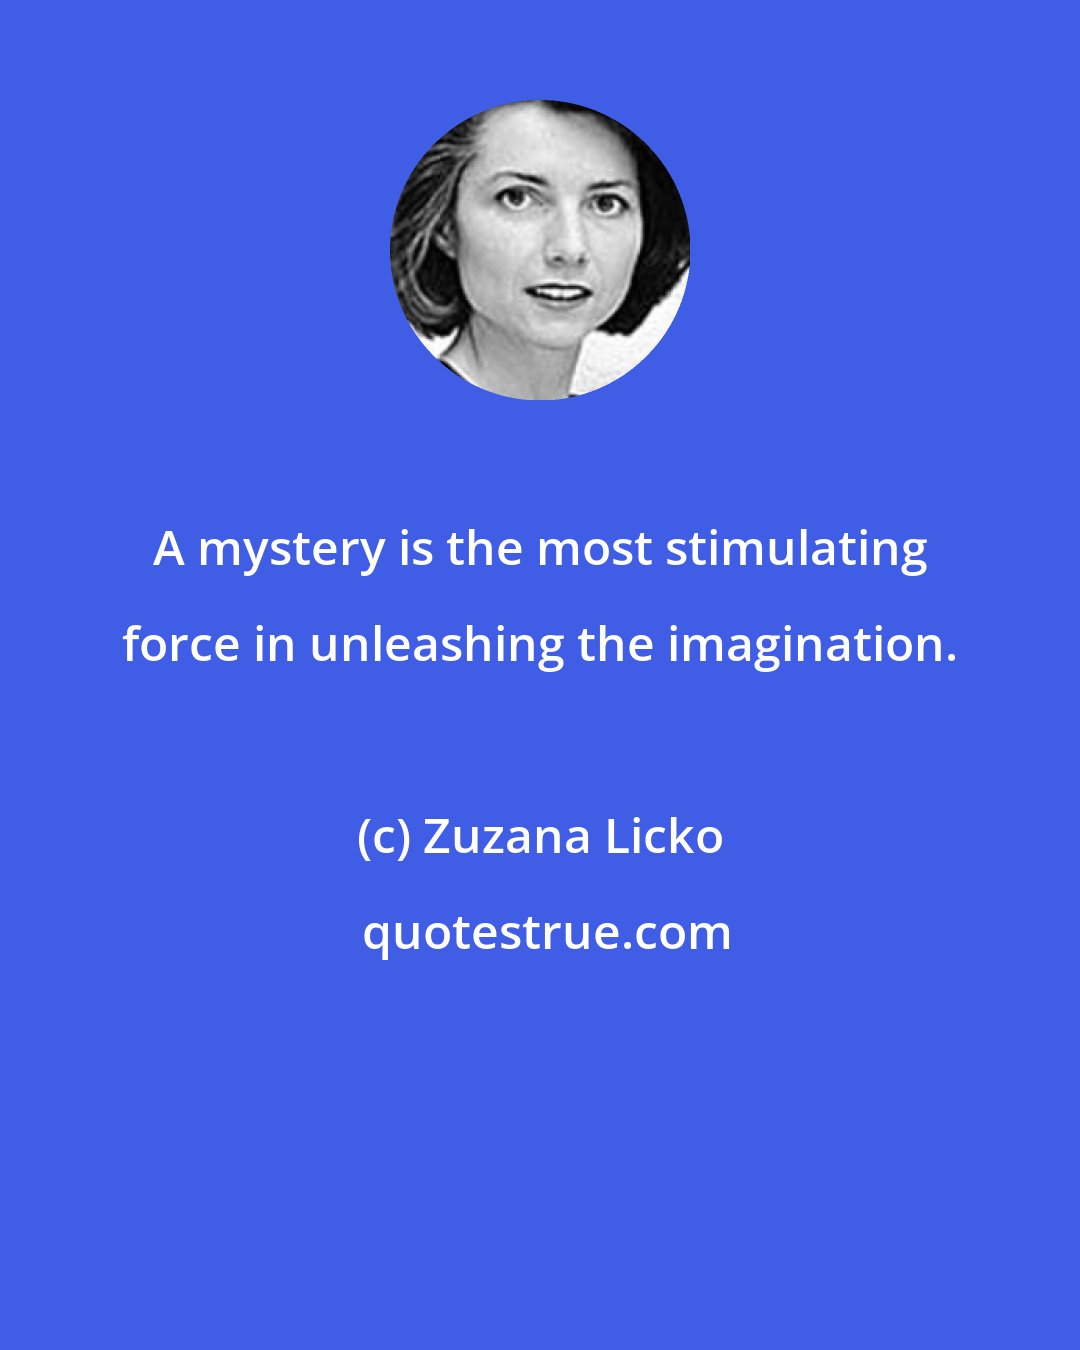 Zuzana Licko: A mystery is the most stimulating force in unleashing the imagination.